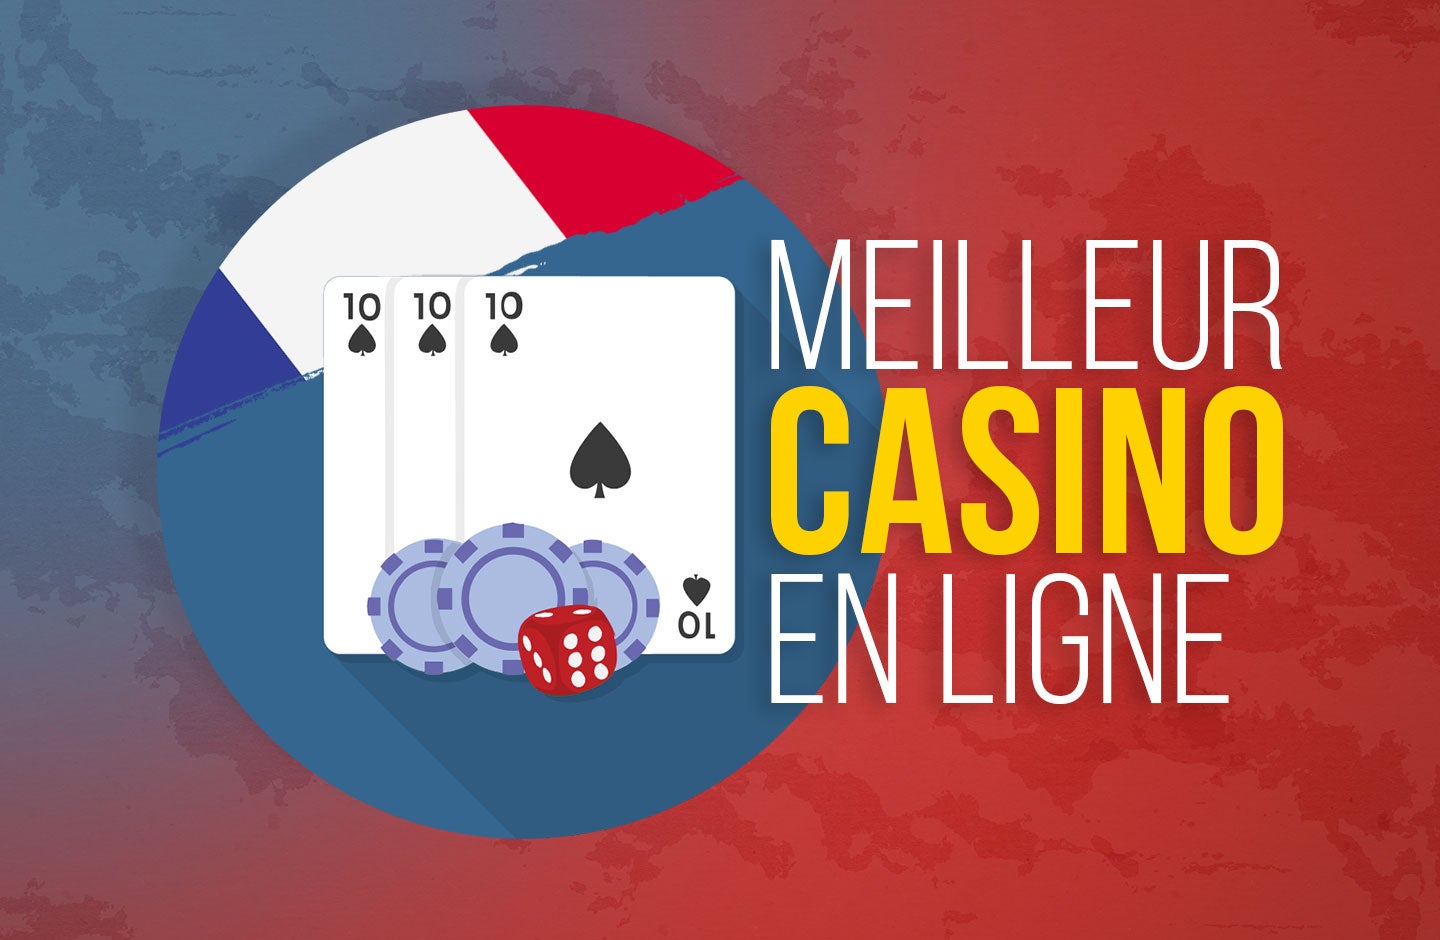 How To Find The Time To casino en ligne 2023 On Facebook